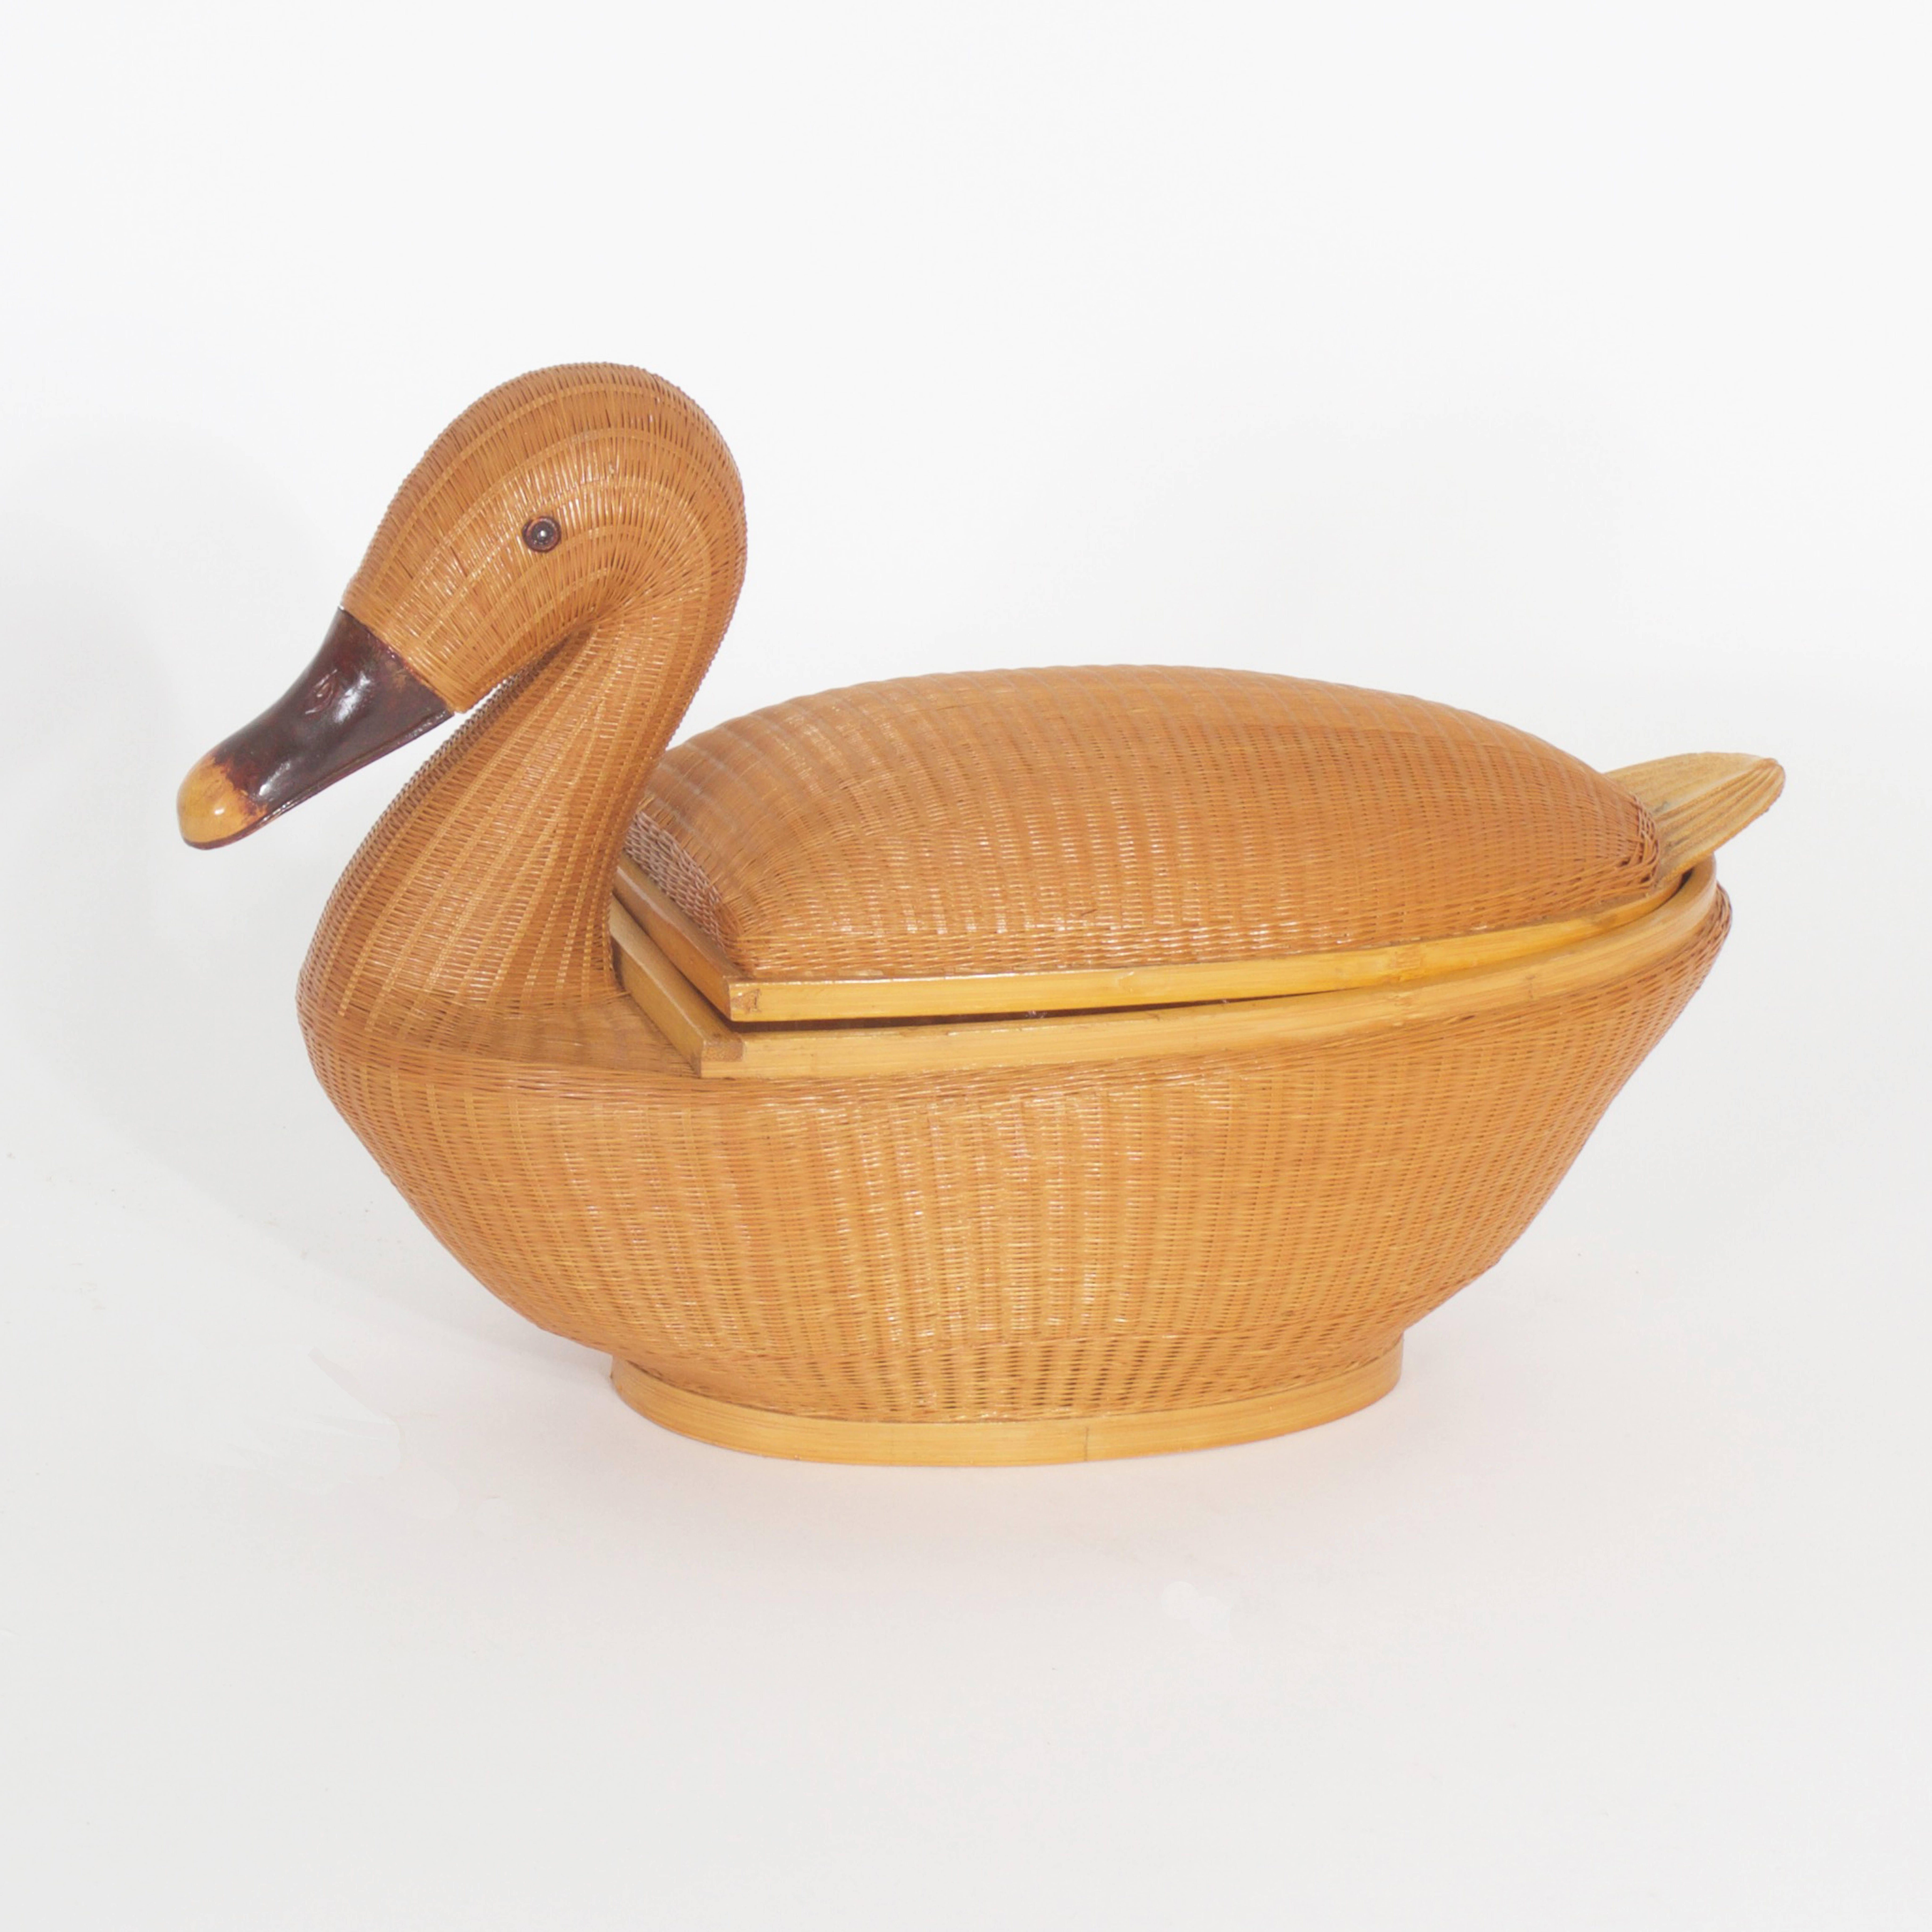 Delightful mid century wicker swan basket constructed of a tightly woven reed trimmed with bamboo. The top lid opens to reveal storage lined with a surprising herring bone weave.

